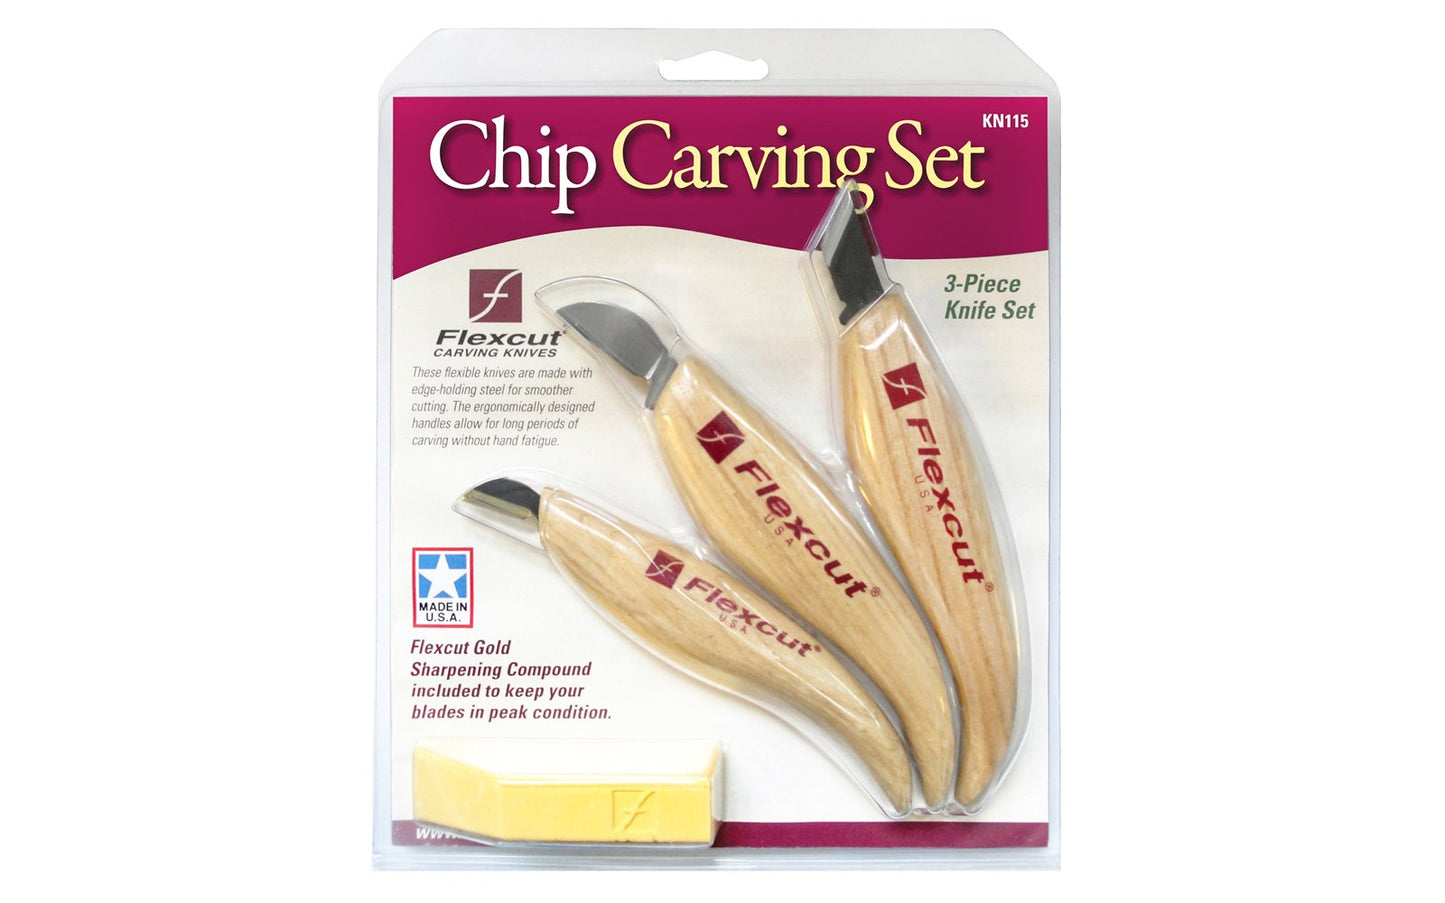 Flexcut 3-Knife Chip Carving Set ~ KN115 - KN11 Skew Knife,  KN15 Chip Carving Knife,  & KN20 Mini-Chip Carving Knife ~ High Carbon Spring Steel blades - Tempered to HRC 59-61 - Made in USA - Flexcut Three Piece Set ~ Flexcut 3-piece set - Chip Carving Set